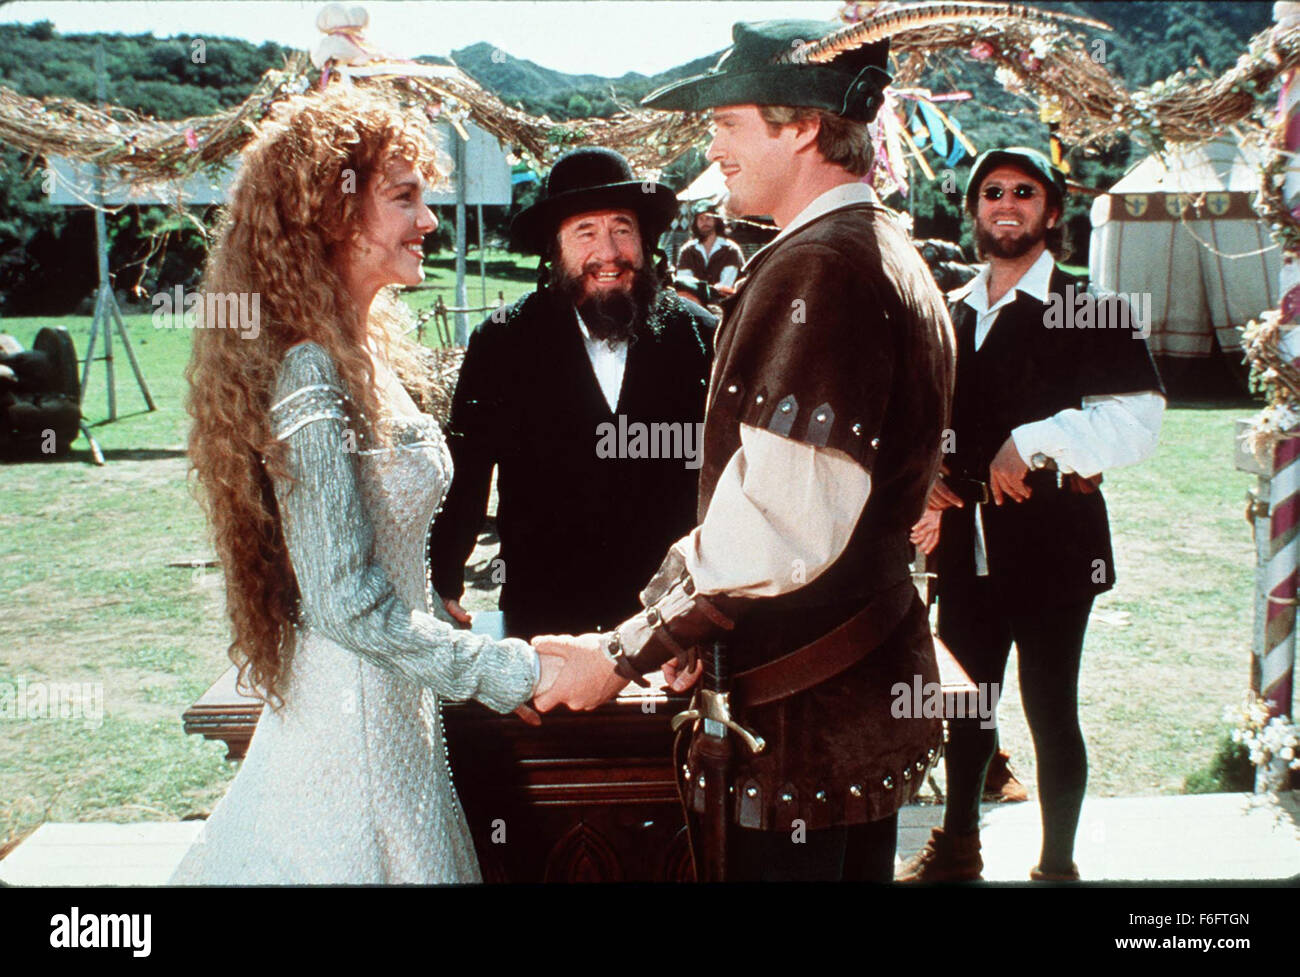 Jun 28, 1993; London, ENGLAND; AMY YASBECK as Maid Marion, MEL BROOKS as Rabbi Tuckman, CARY ELWES as Robin Hood, and MARK BLANKFIELD as Blinkin in the comedy ''Robin Hood: Men in Tights'' directed by Mel Brooks. Stock Photo